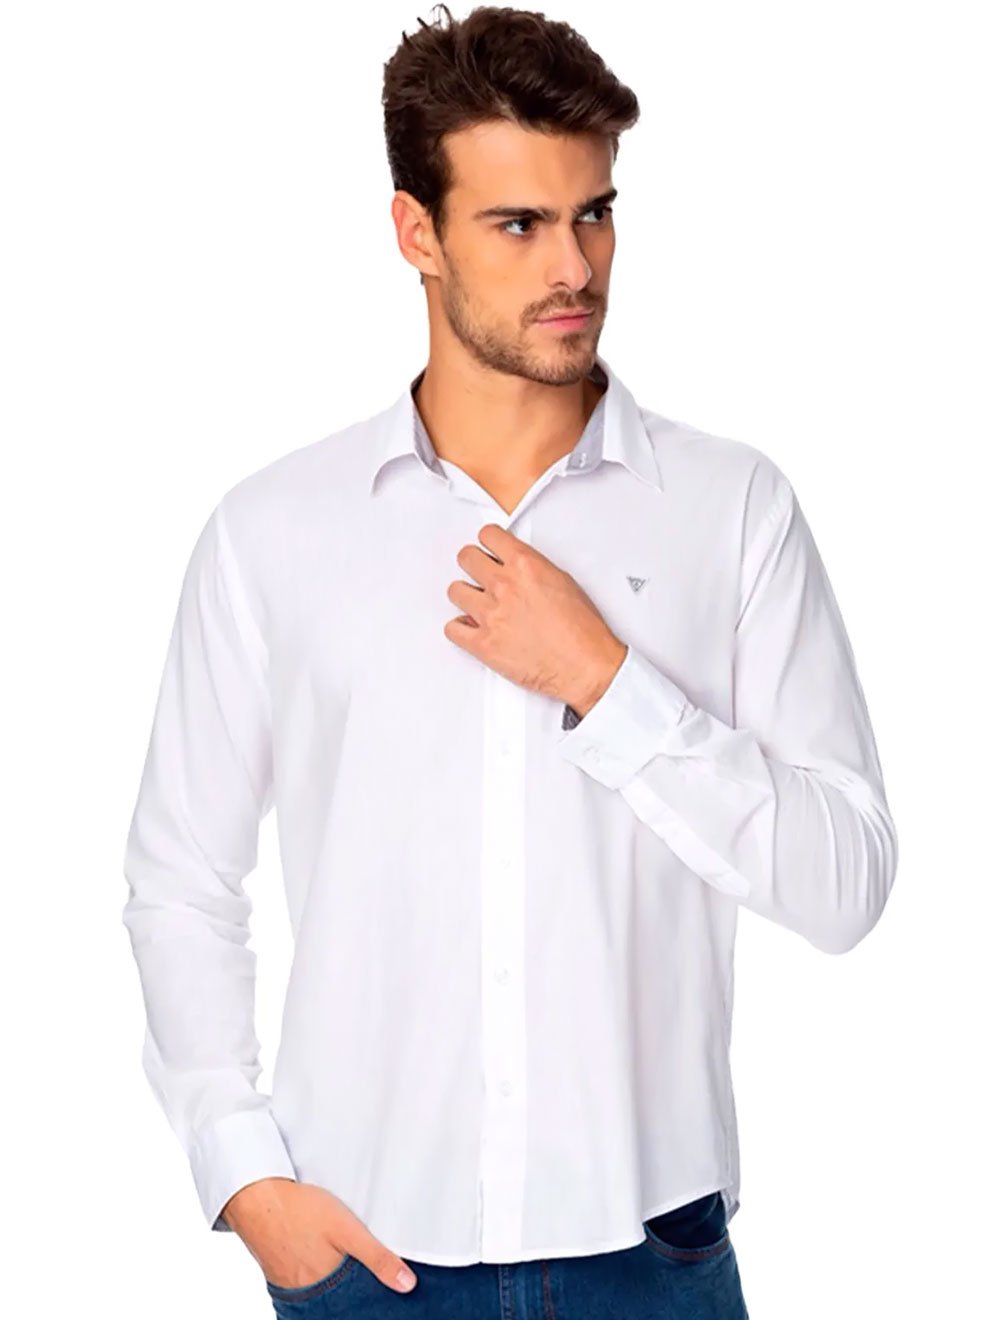 Camisa Guess Masculina Classic Icon Branca